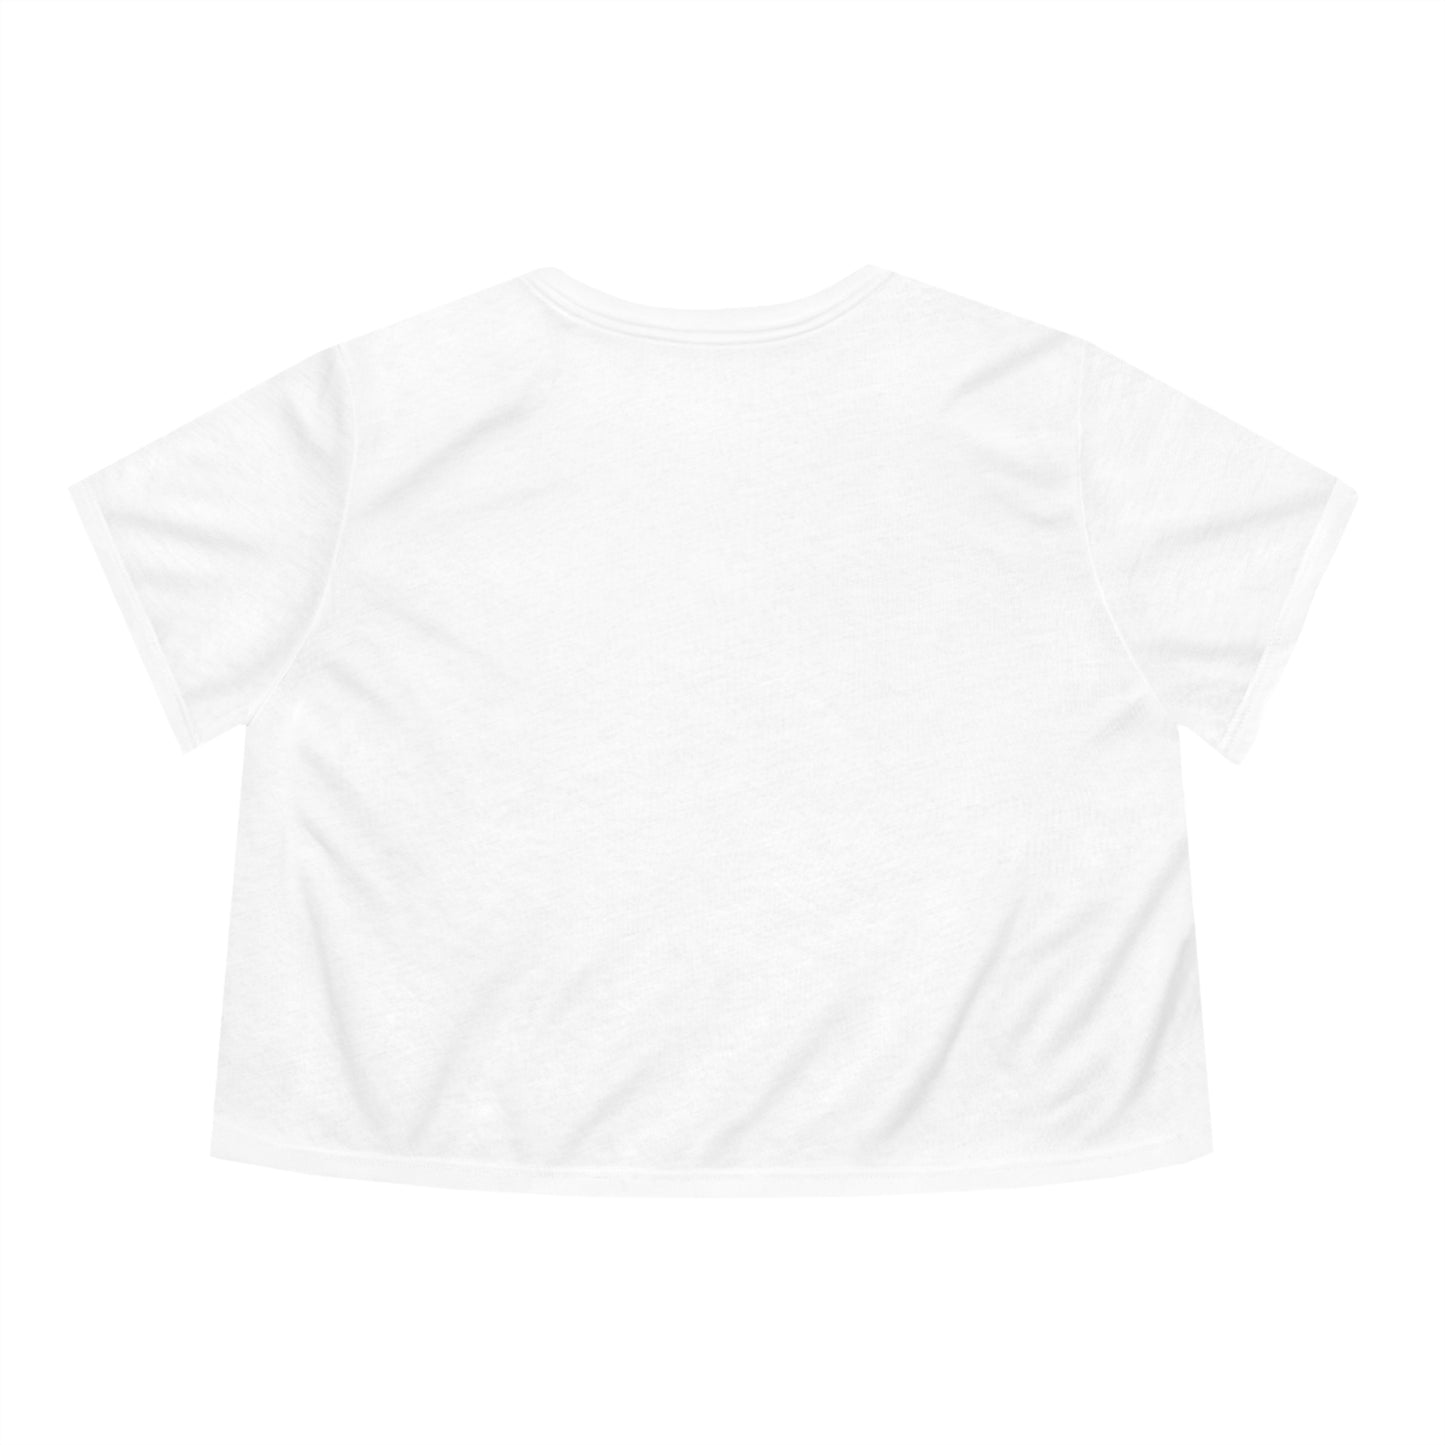 Oeuvre De Cecilia Rae Cropped Tee